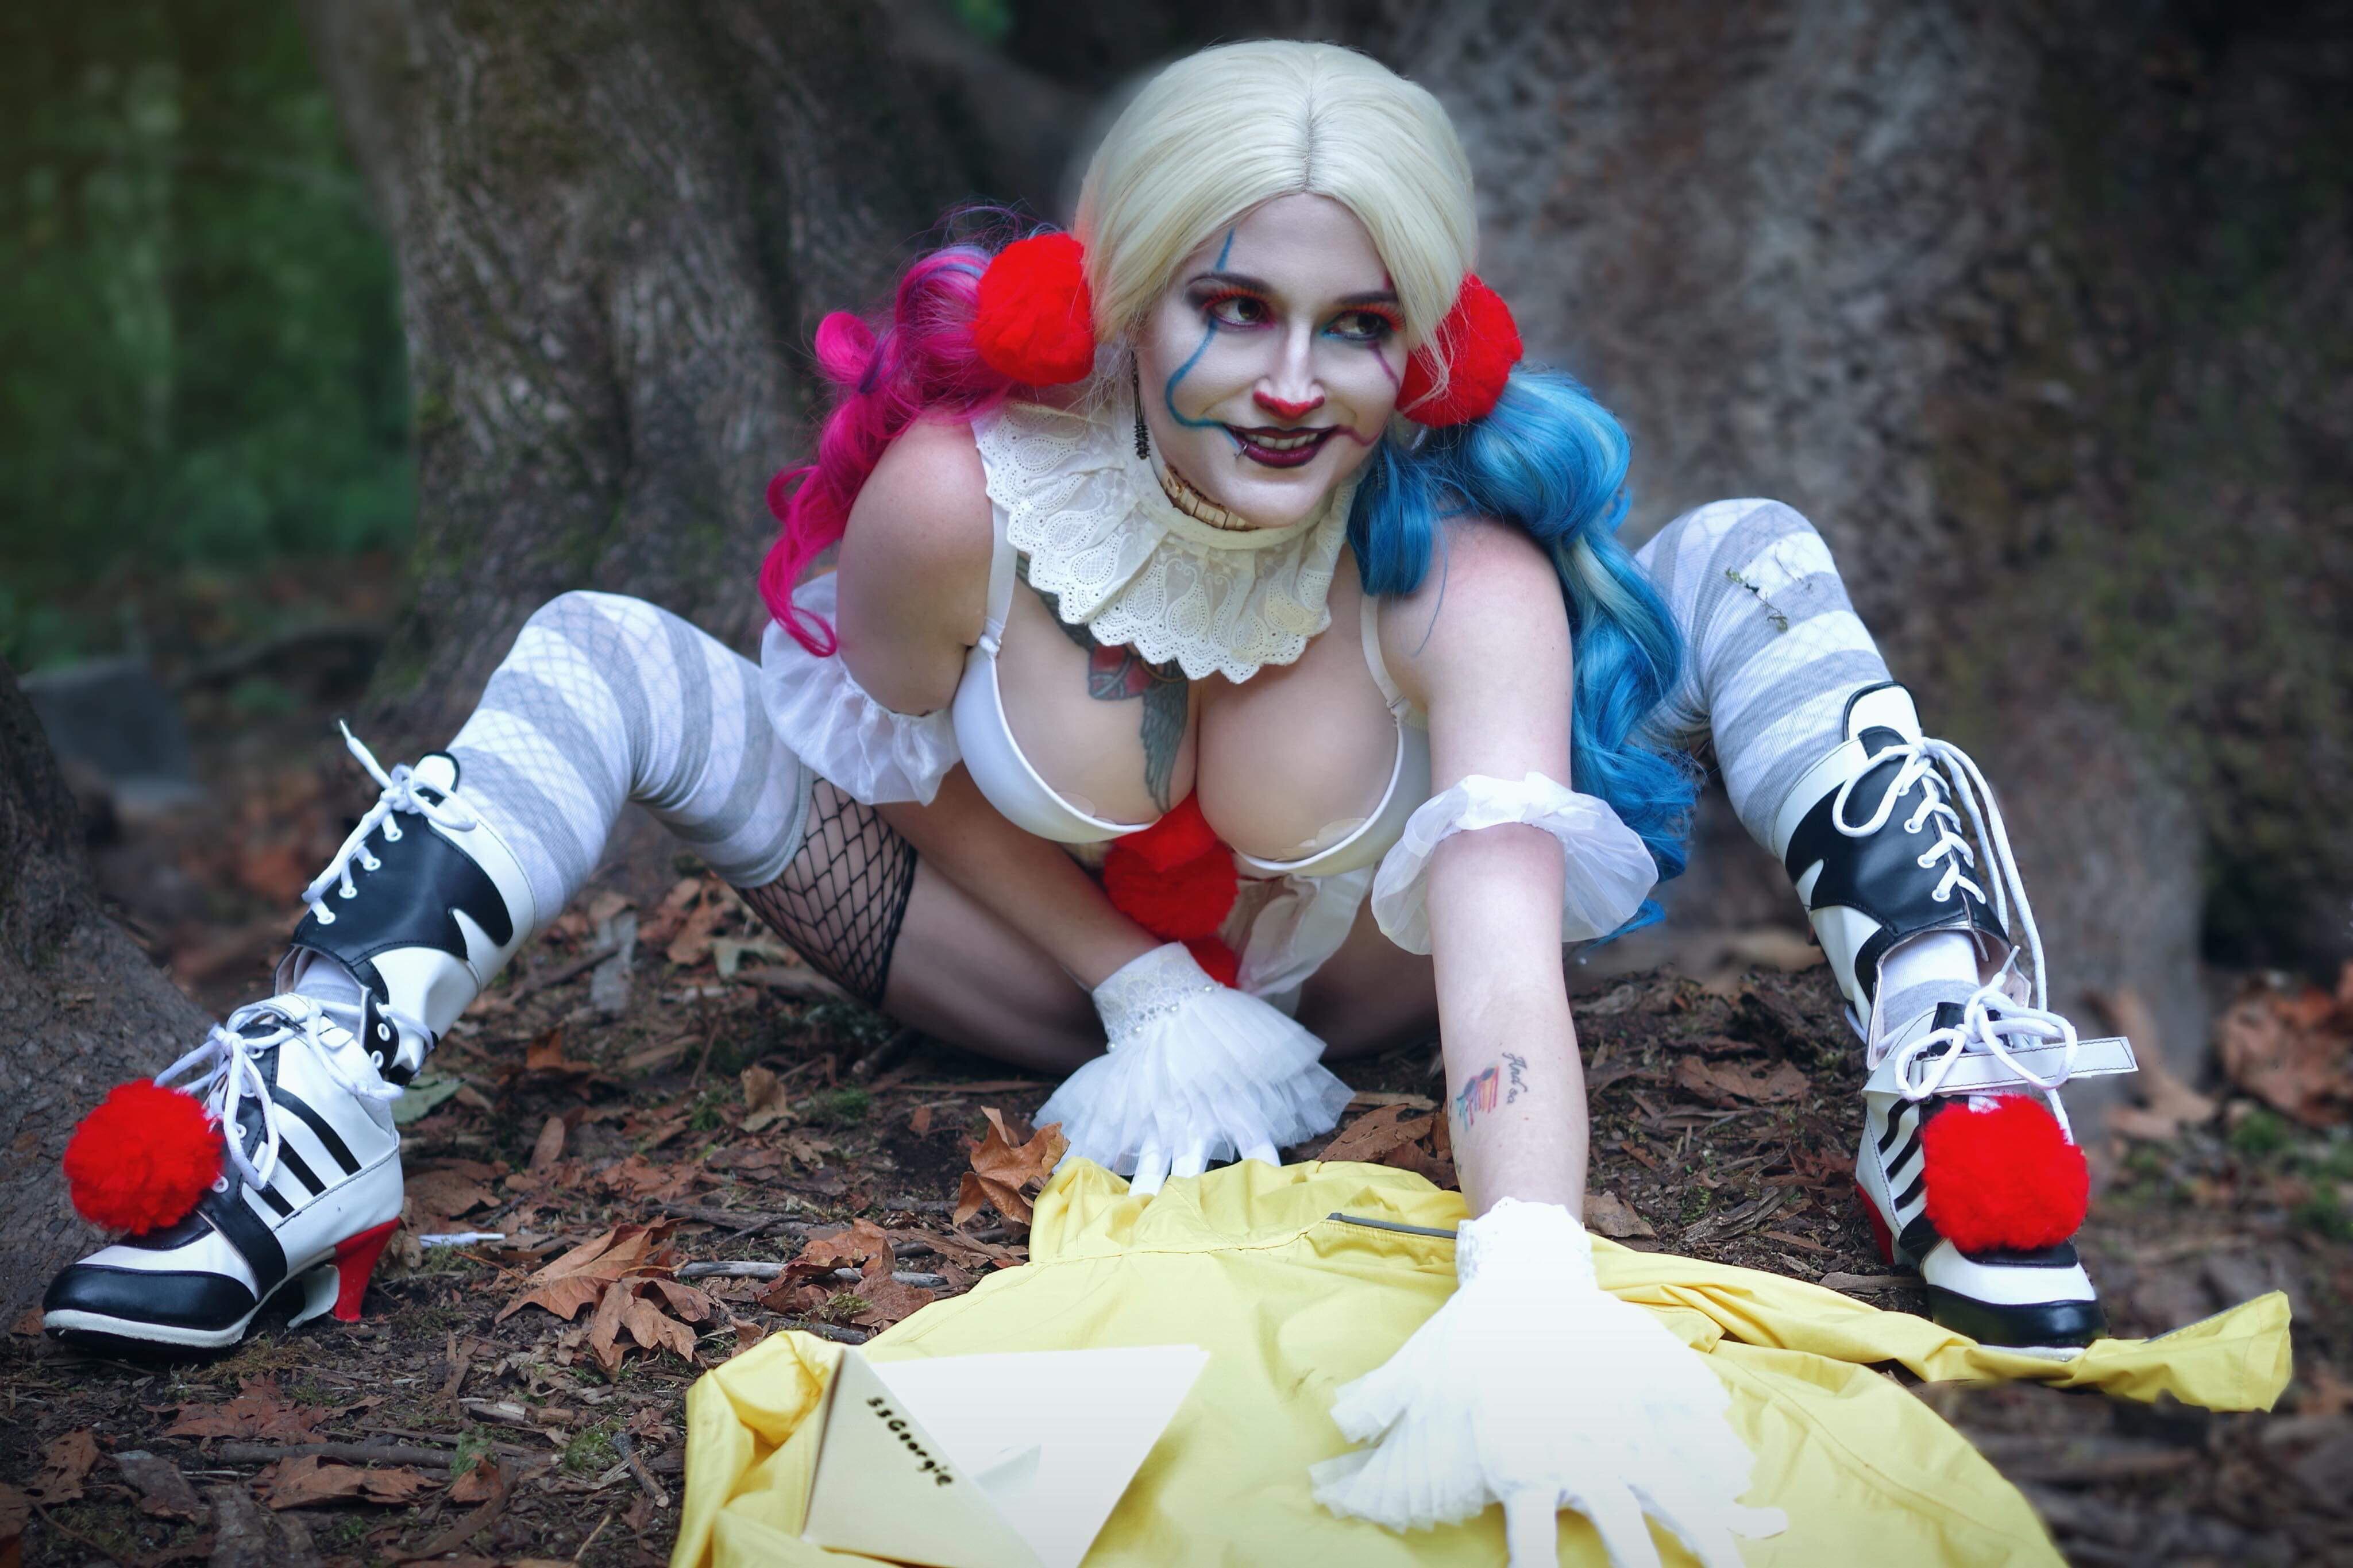 Pennywise Harley Quinn From It And Batman By Captive Cosplay - Cosplay Boob...